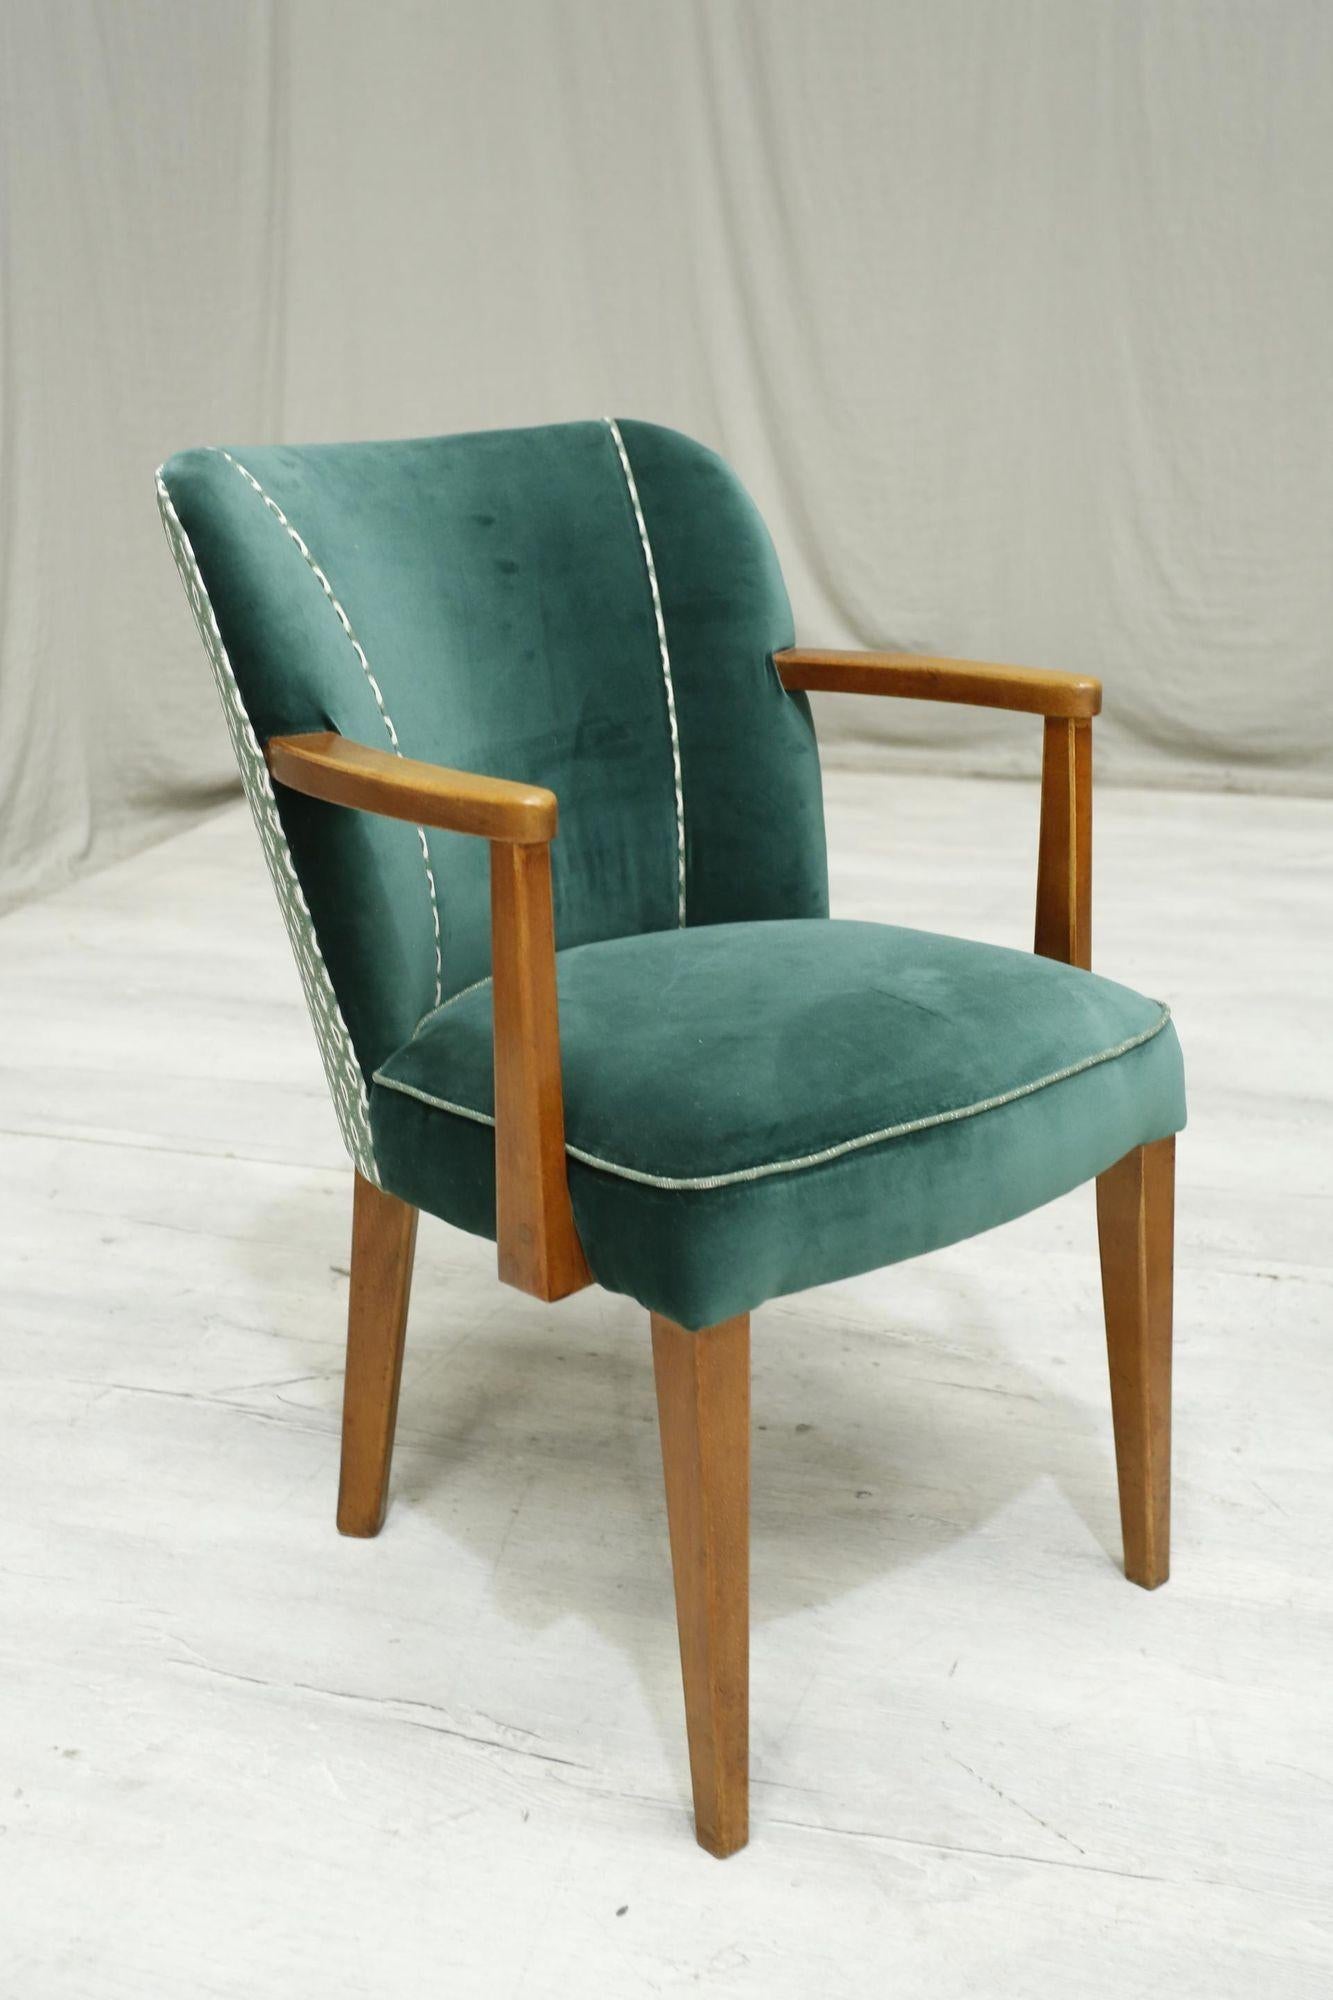 These are a very stylish pair of mid century desk chairs. These have a stained beech frame with great patina. The whole design sets these chairs off perfectly. From the almost Scandinavian nature of the frame to the tall tapered legs, the curved